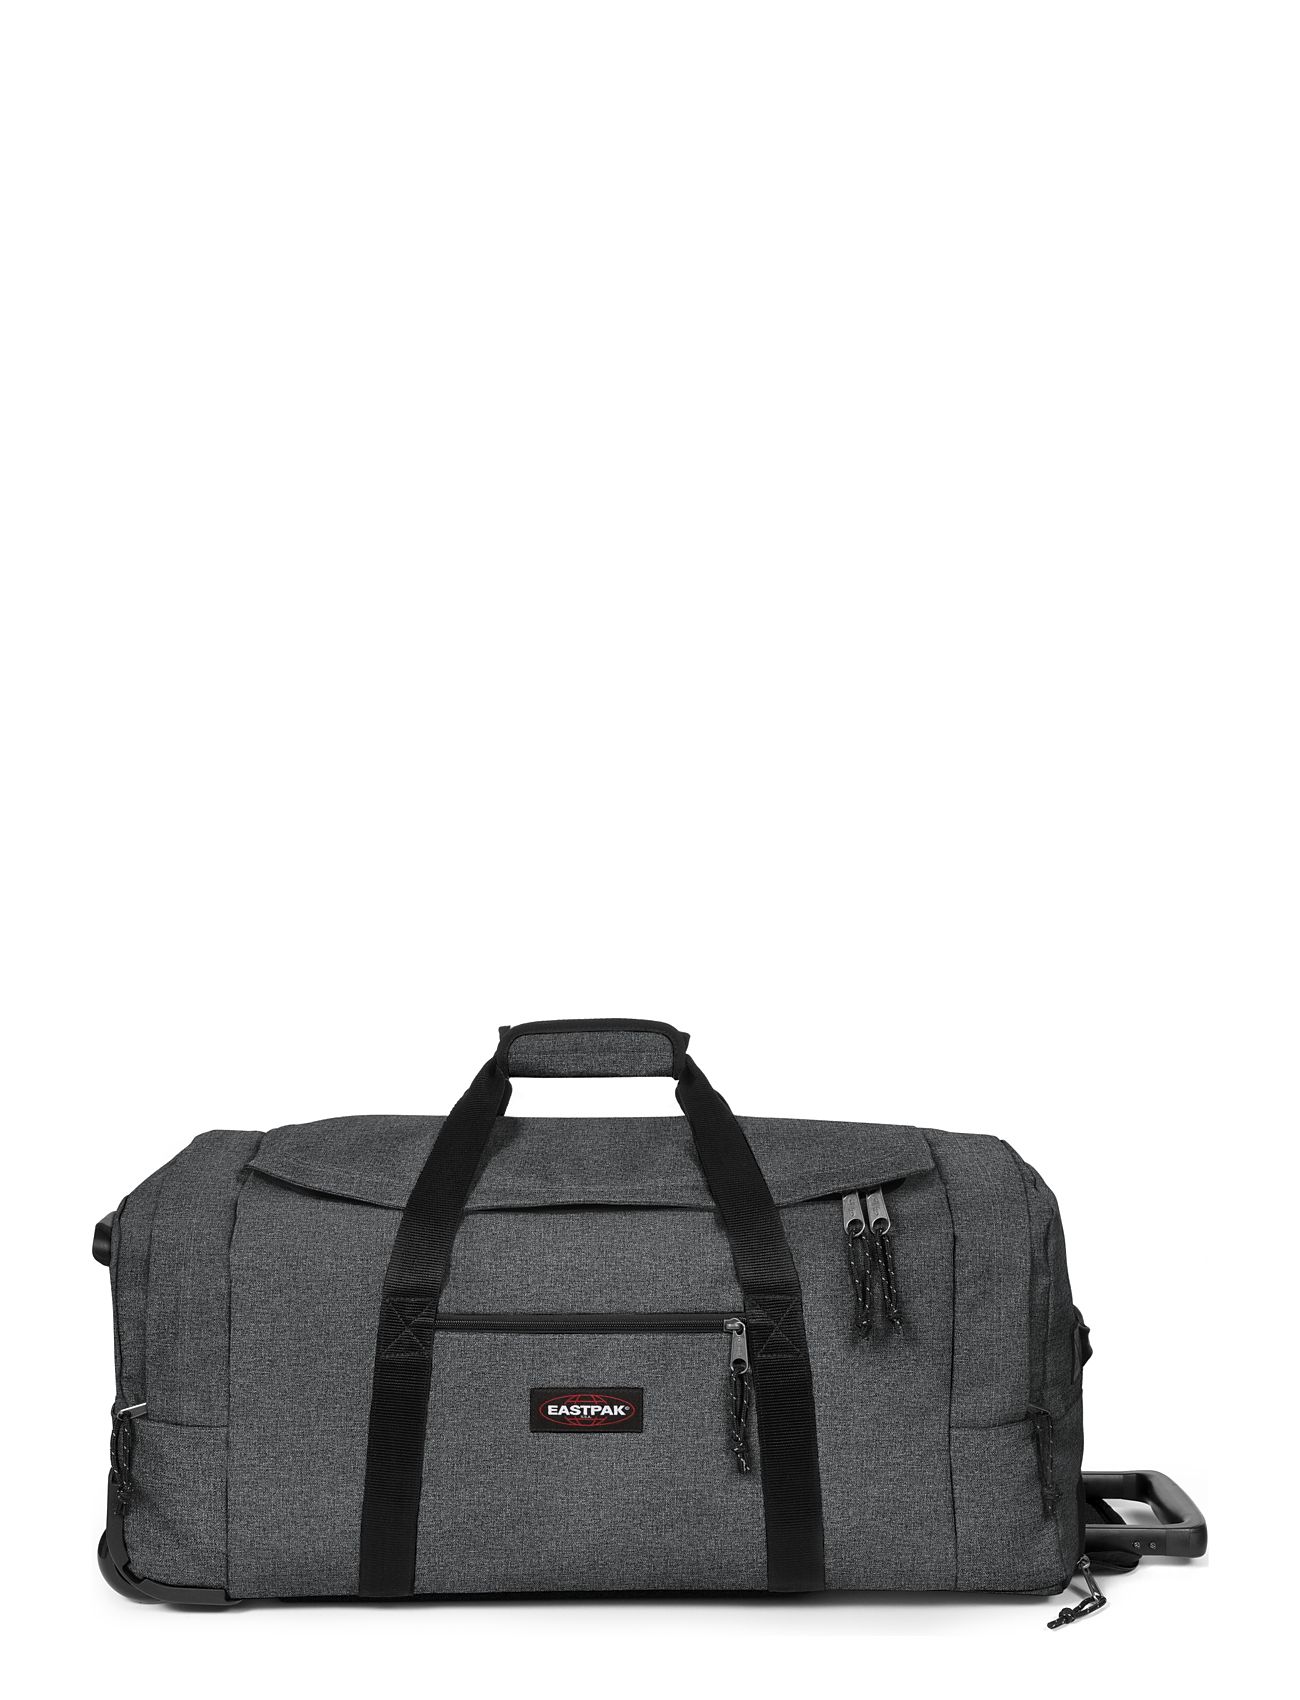 Leatherface M + Bags Suitcases Grey Eastpak